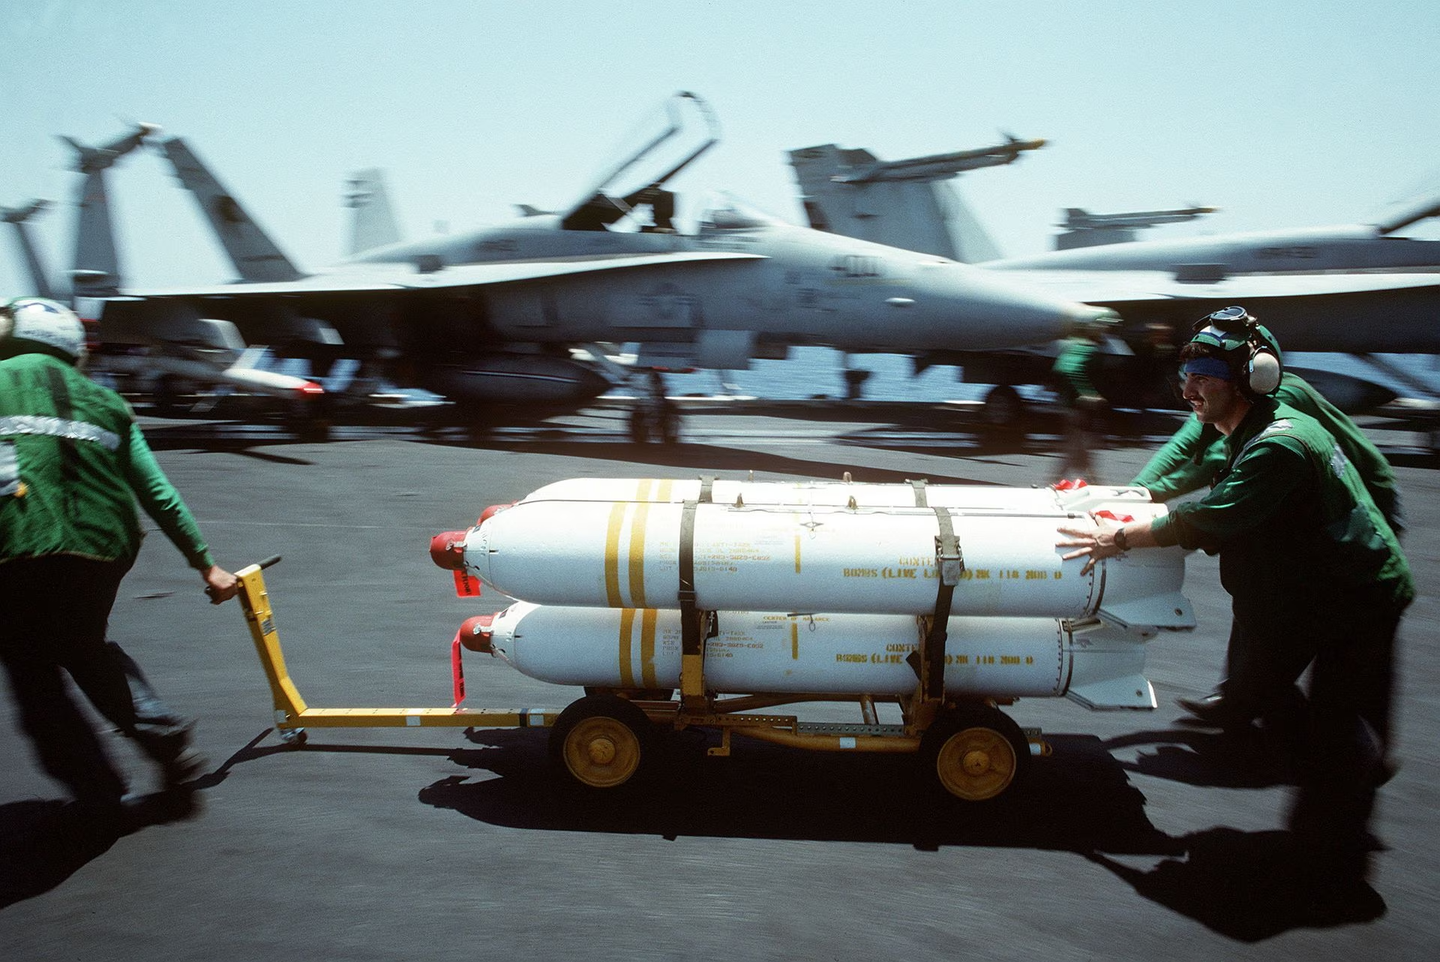 Maintenance crewmen from Attack Squadron 34 move a weapons skid loaded with Mk 20 Rockeye II cluster bombs across the flight deck of the nuclear-powered aircraft carrier USS<em> Dwight D. Eisenhower</em> in 1990. <em>Credit: U.S. Navy</em>